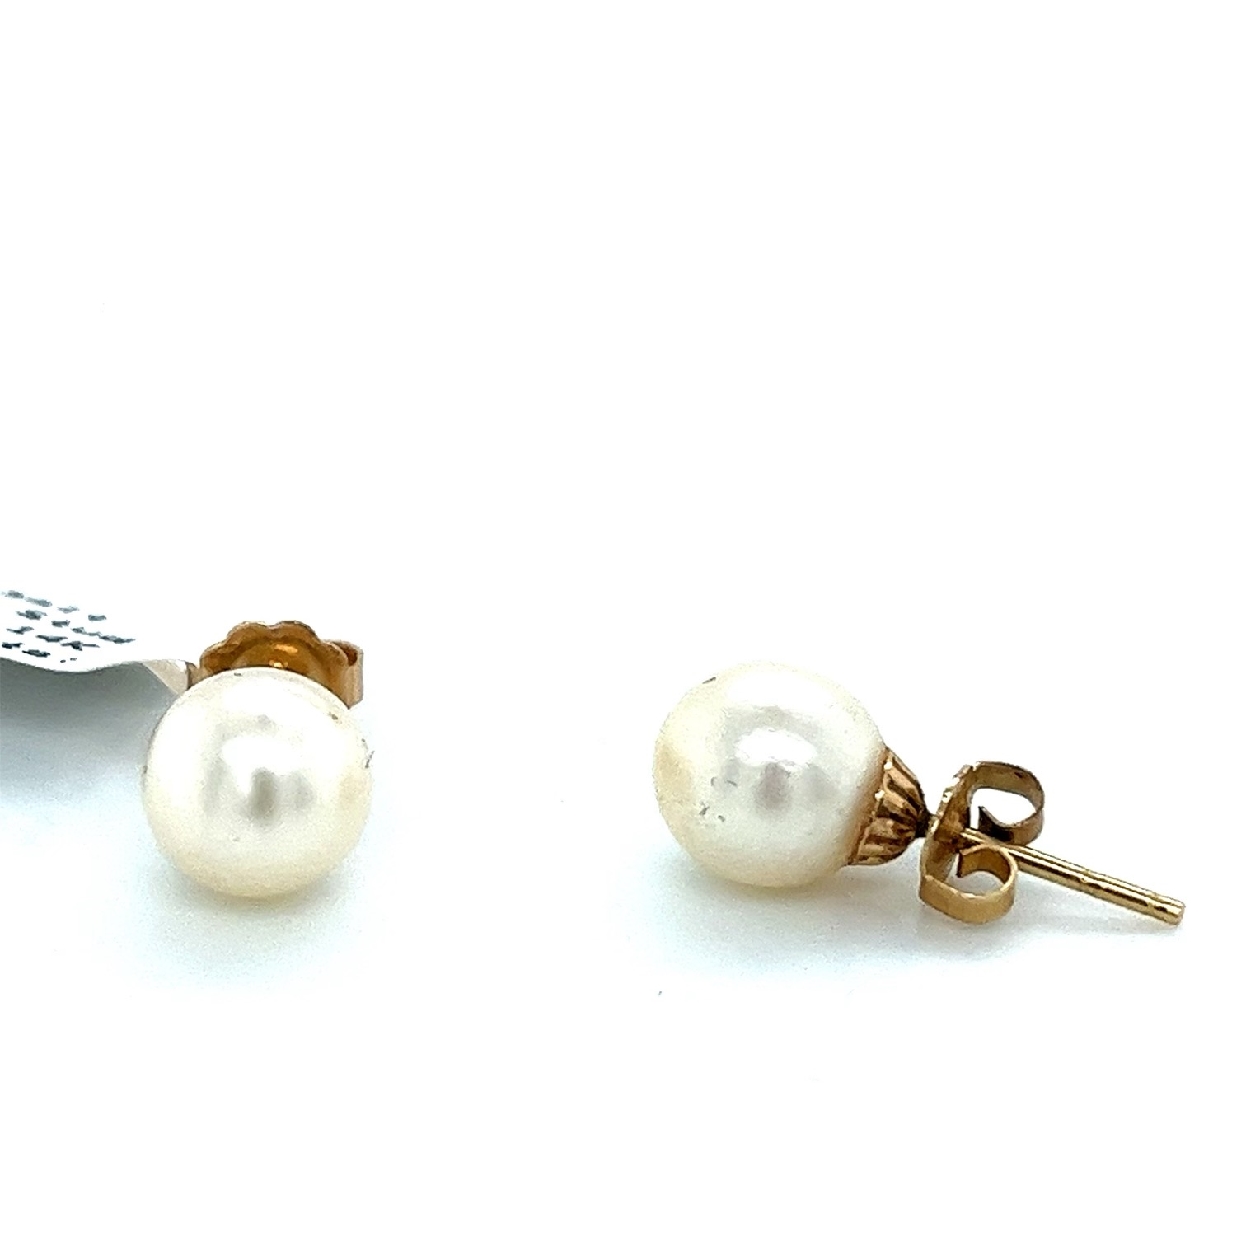 8mm White Salt Water Pearl Stud Earings With 14K Yellw Gold Posts
